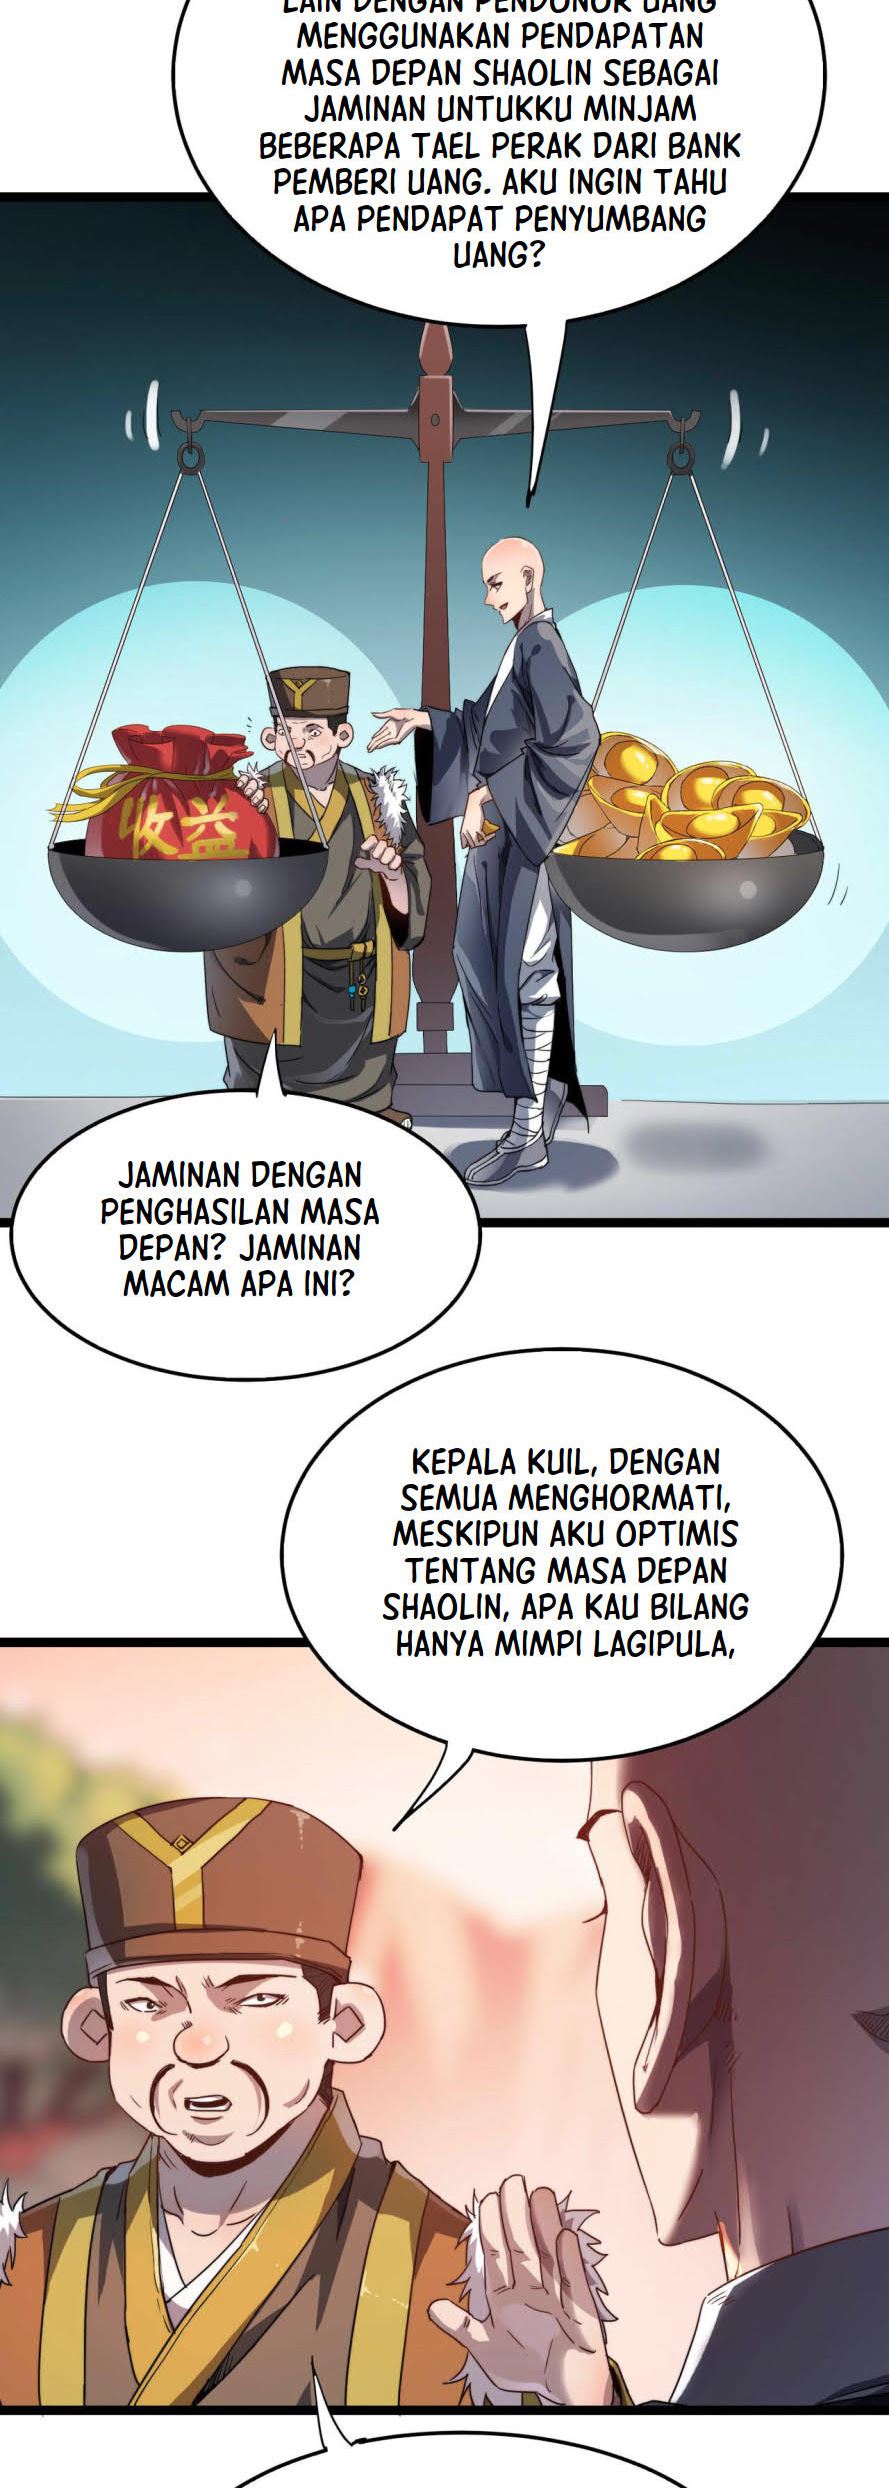 Dilarang COPAS - situs resmi www.mangacanblog.com - Komik building the strongest shaolin temple in another world 007 - chapter 7 8 Indonesia building the strongest shaolin temple in another world 007 - chapter 7 Terbaru 11|Baca Manga Komik Indonesia|Mangacan